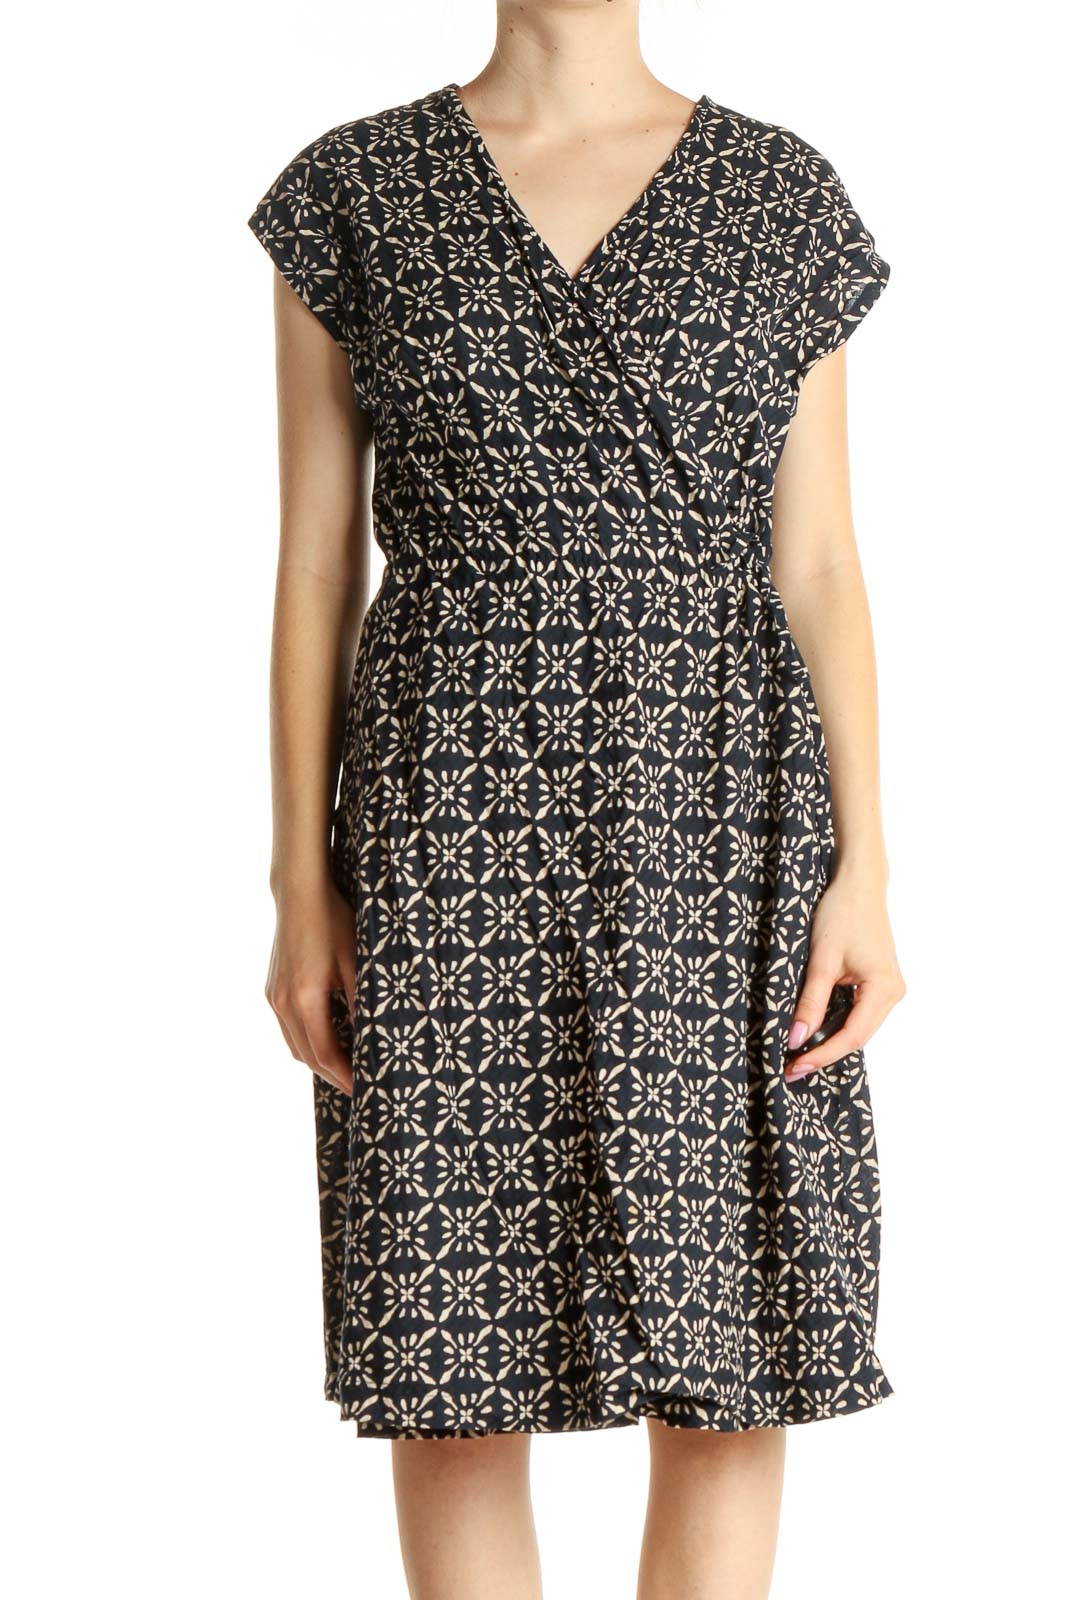 Blue Geometric Print Cotton Day Fit & Flare Dress Front